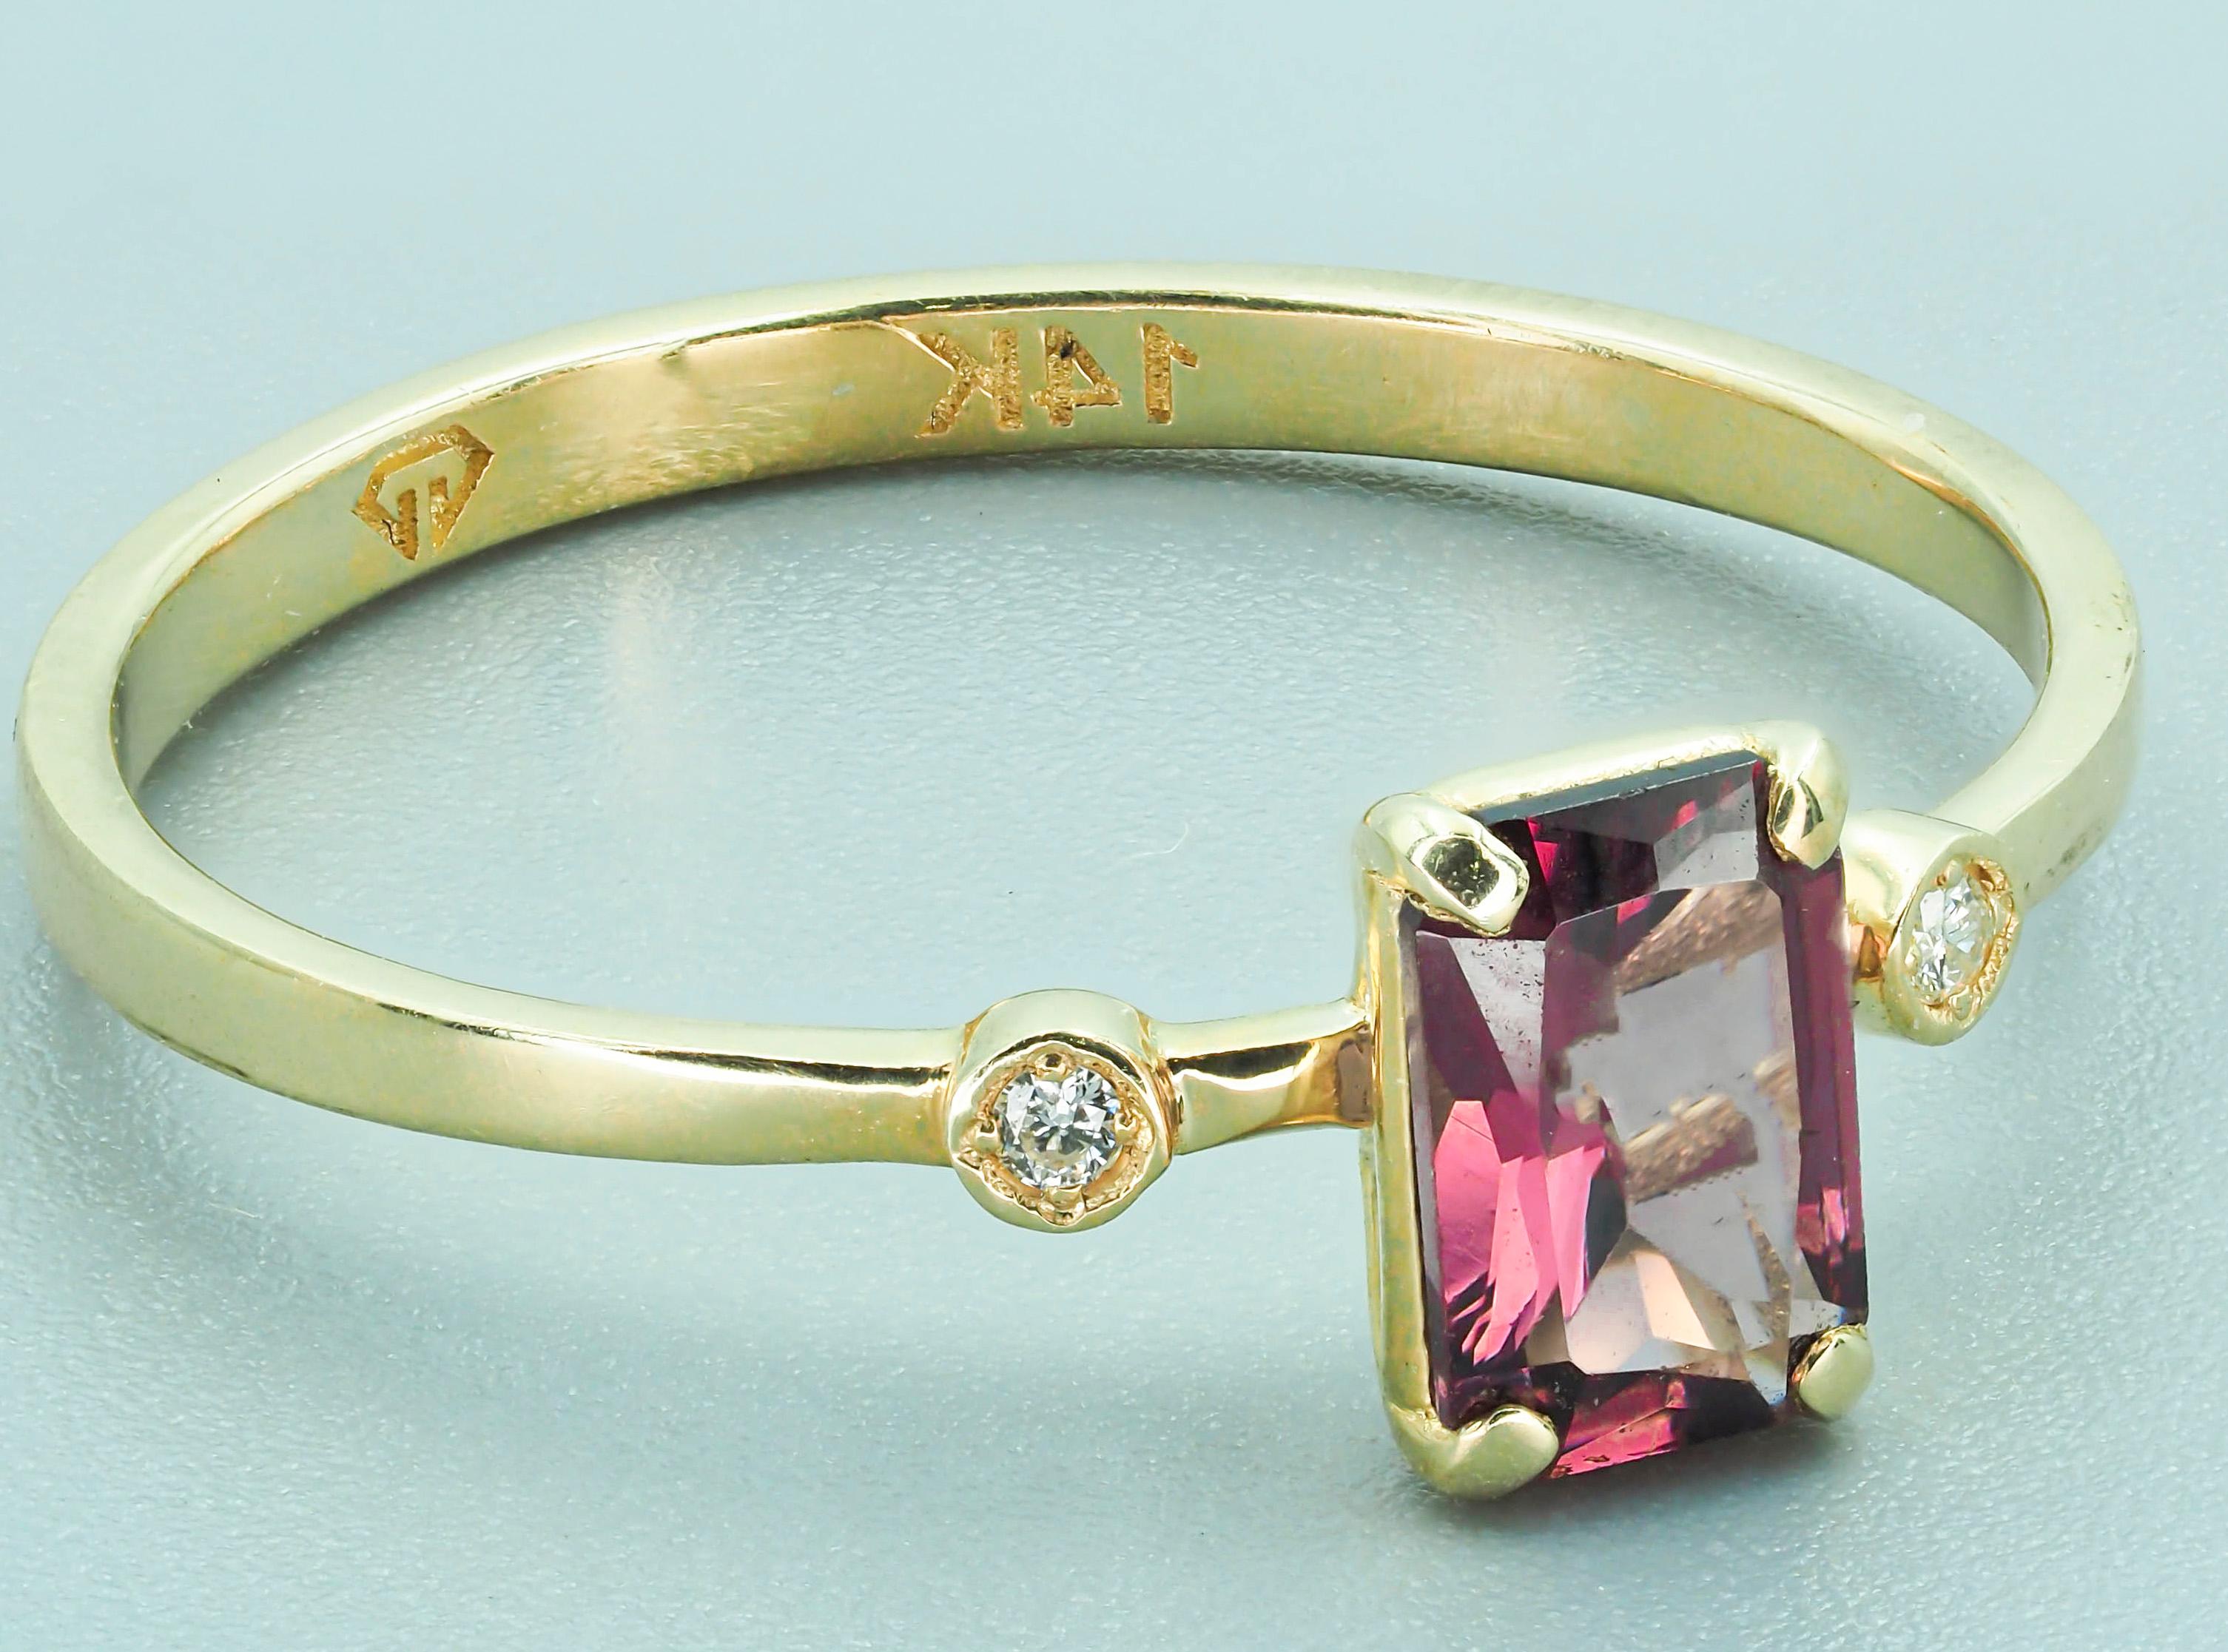 For Sale:  14 karat Gold Ring with Spinel and Diamonds 6